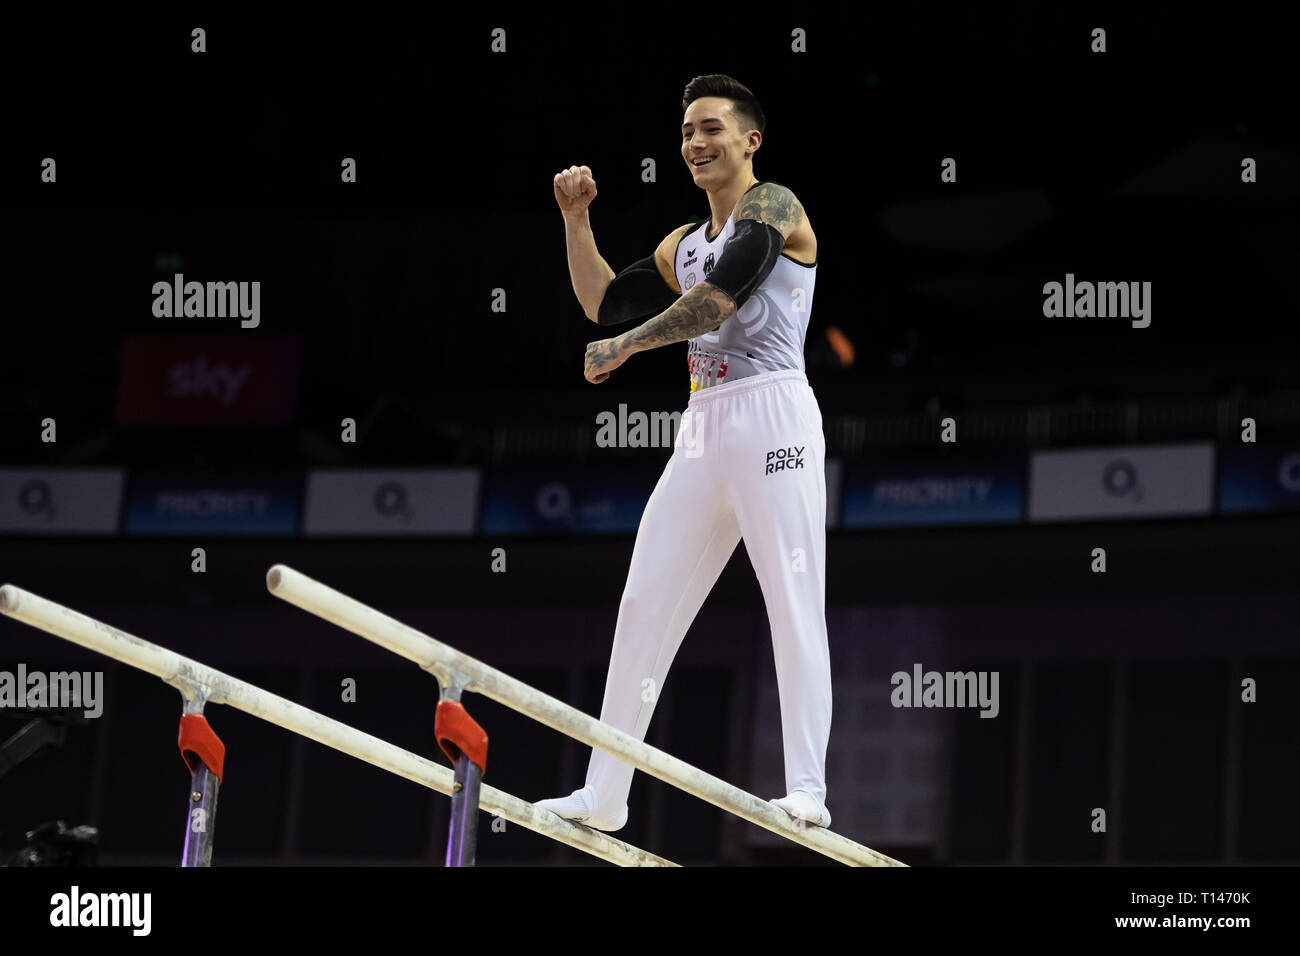 London, UK. 23rd March, 2019. Marcel Nguyen performs on the Parallel Bars during the Matchroom Multisport presents the 2019 Superstars of Gymnastics at The O2 Arena on Saturday, 23 March 2019. LONDON ENGLAND. Credit: Taka G Wu/Alamy News Stock Photo